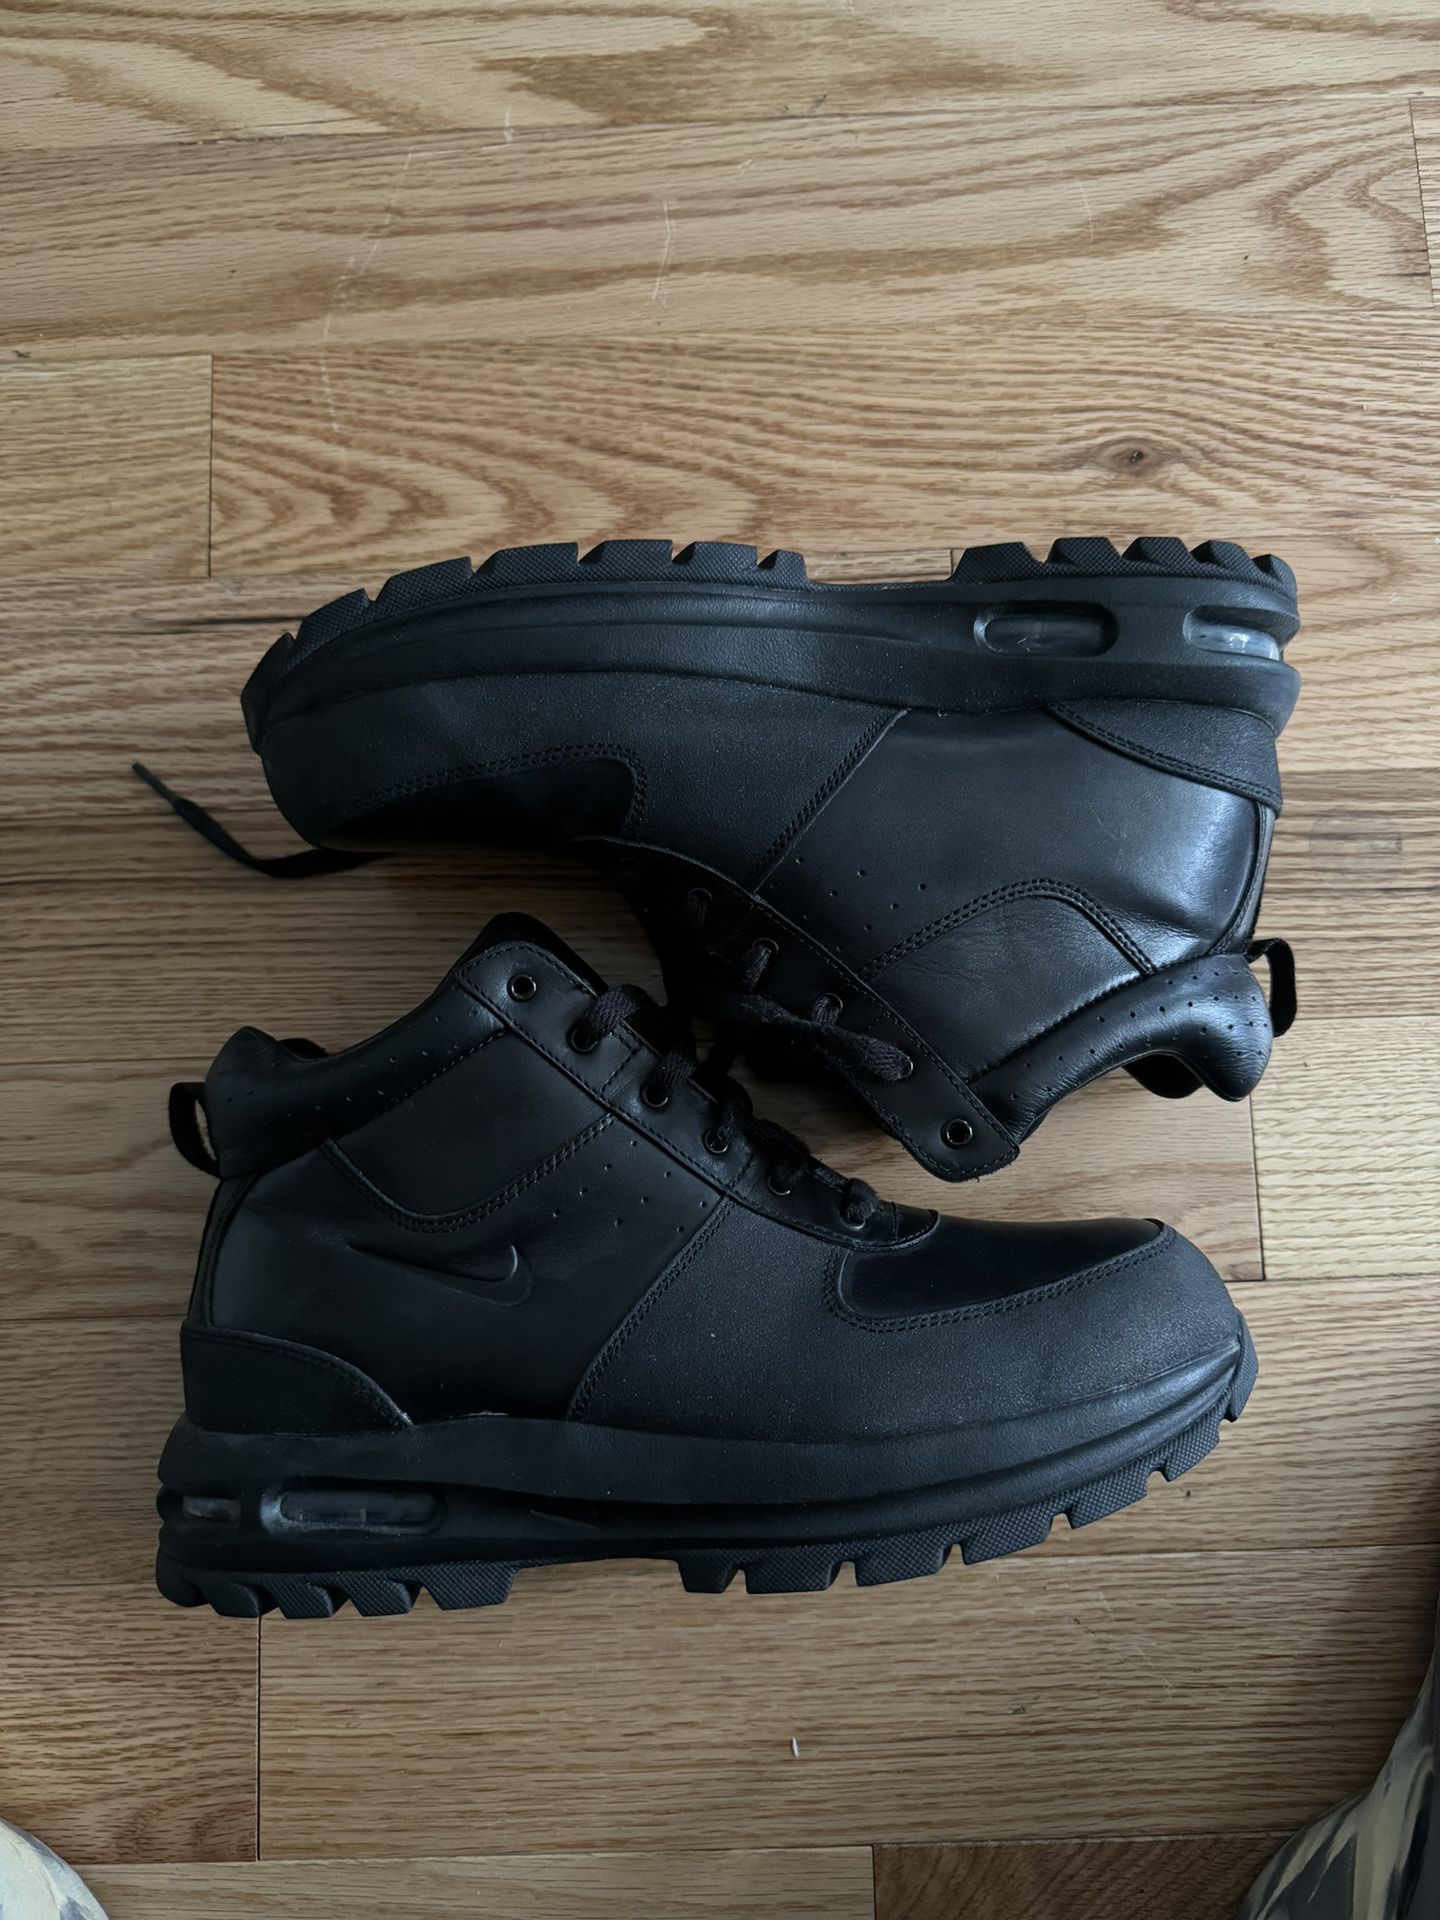 Nike Acg Boots